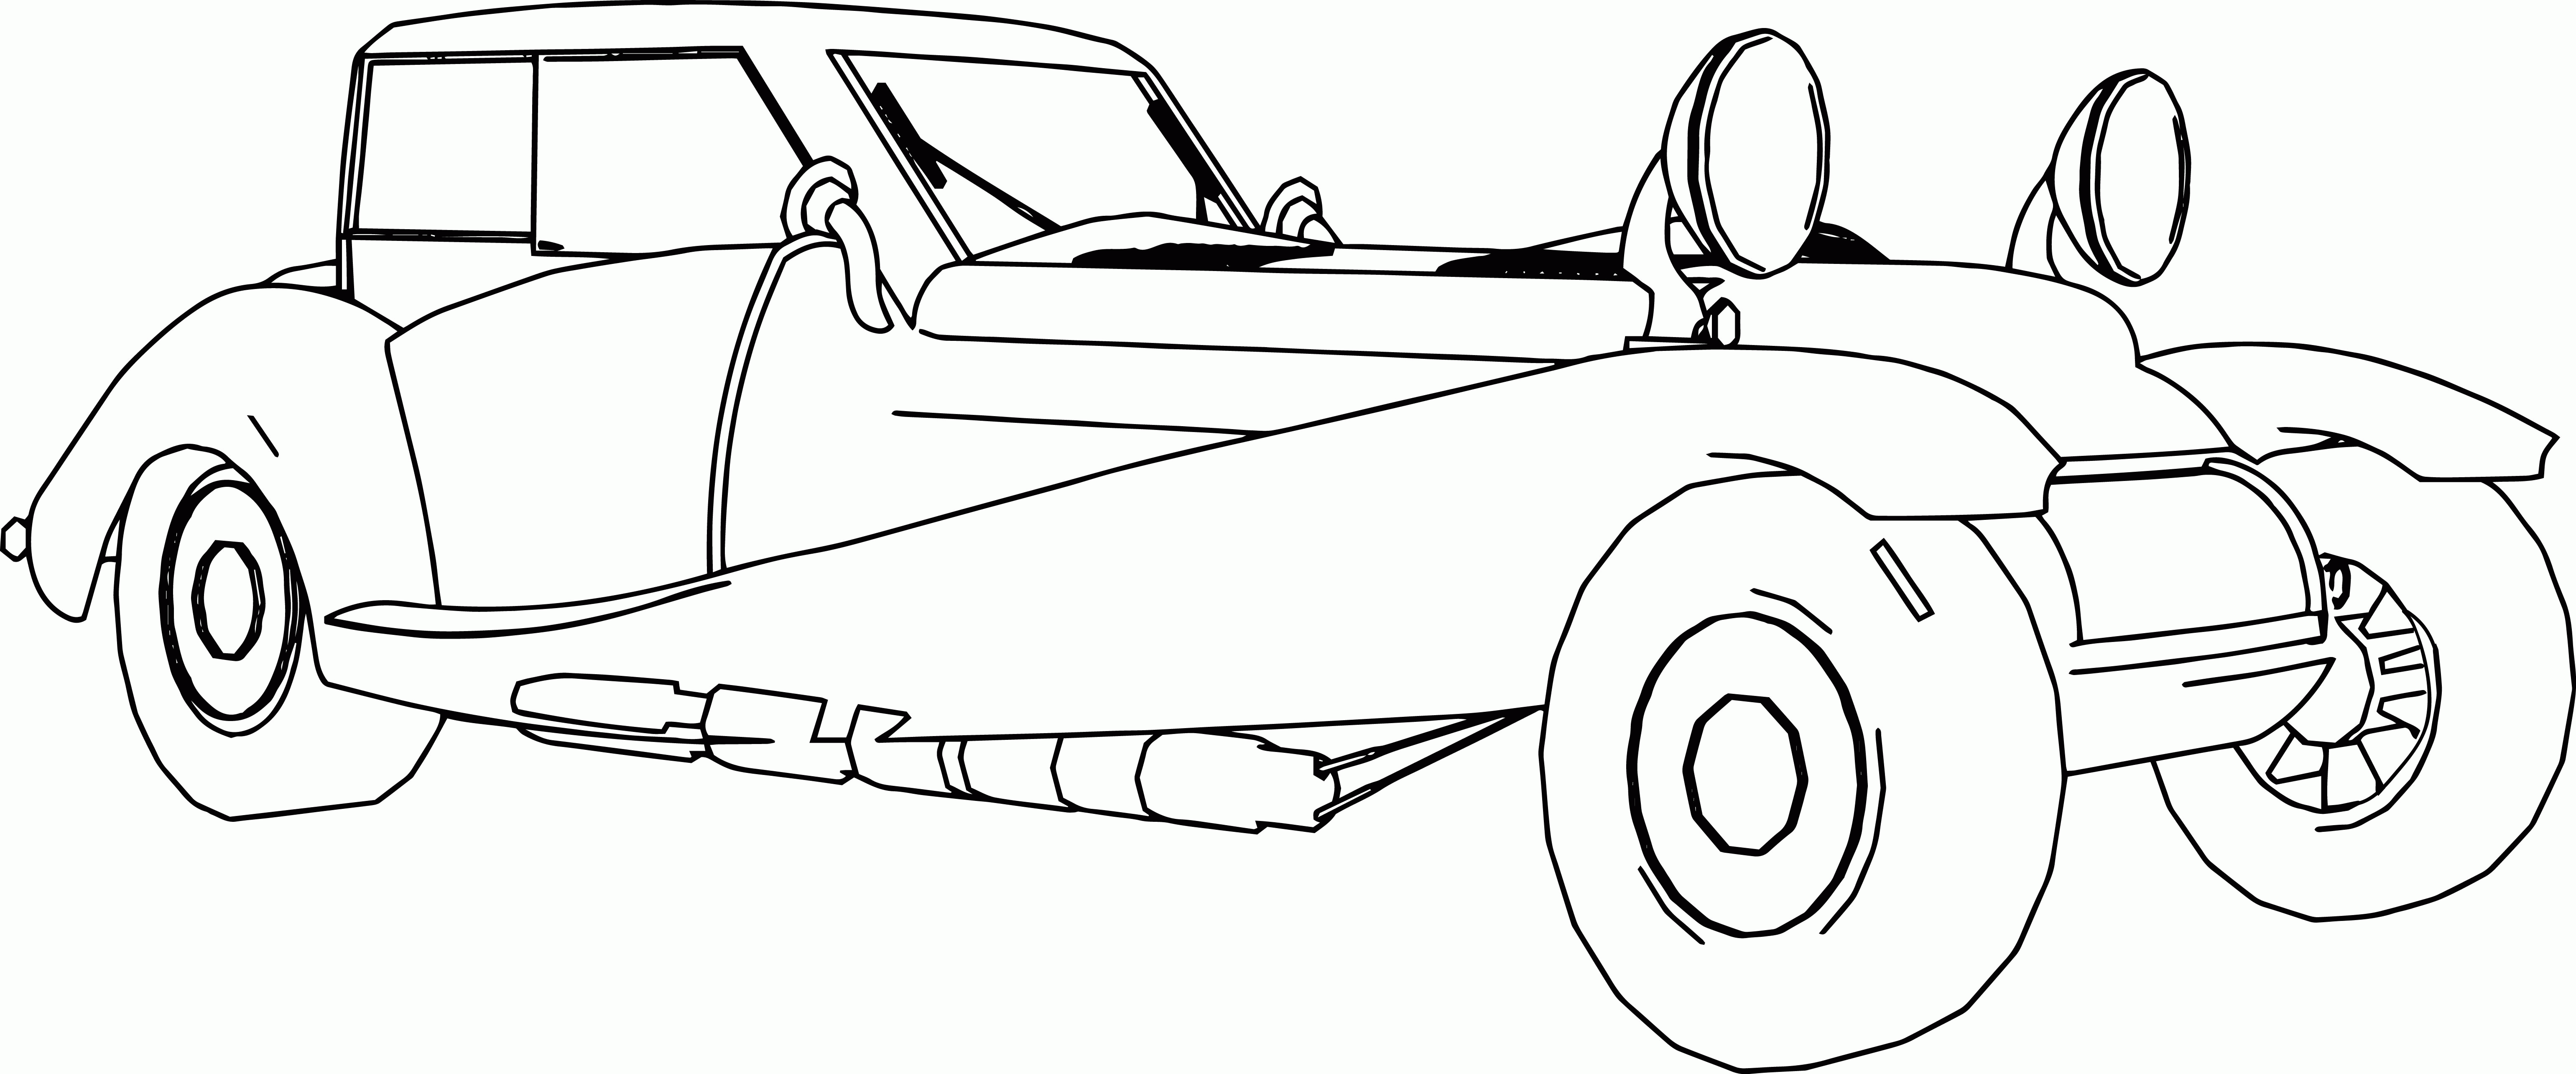 Go Kart - Coloring Pages for Kids and for Adults